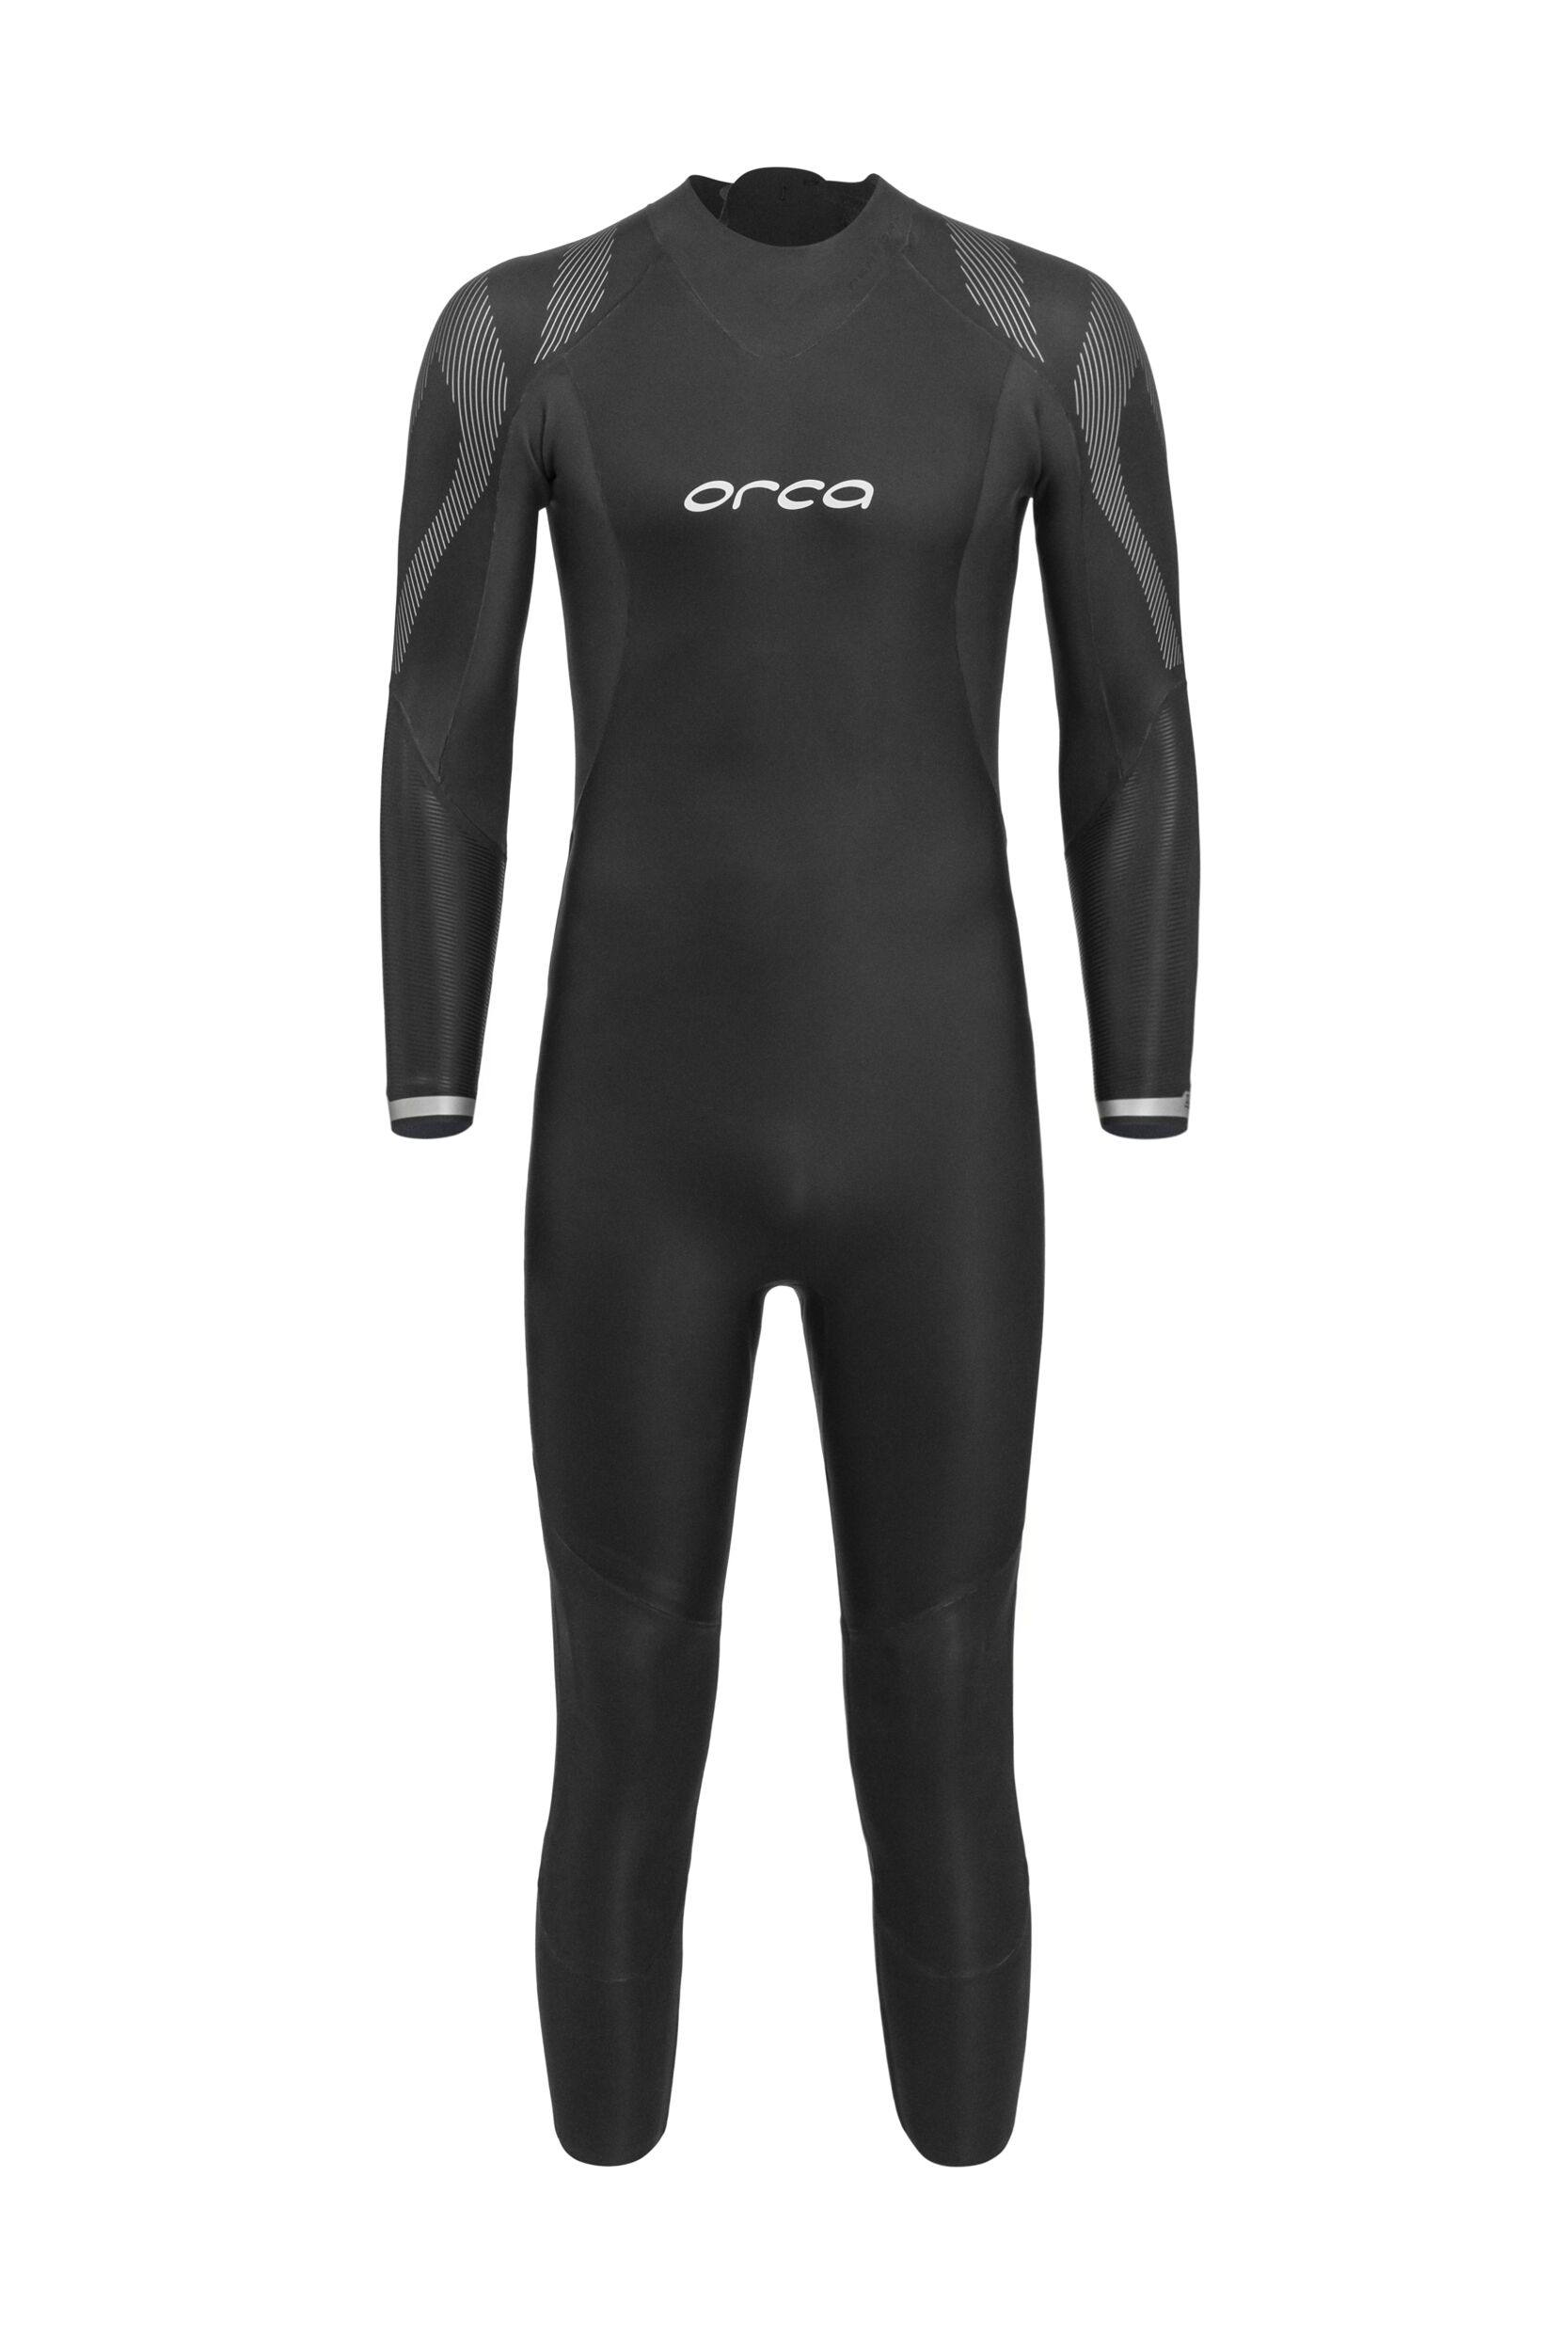 Orca Zeal Openwater Perform Wetsuit - MyTriathlon